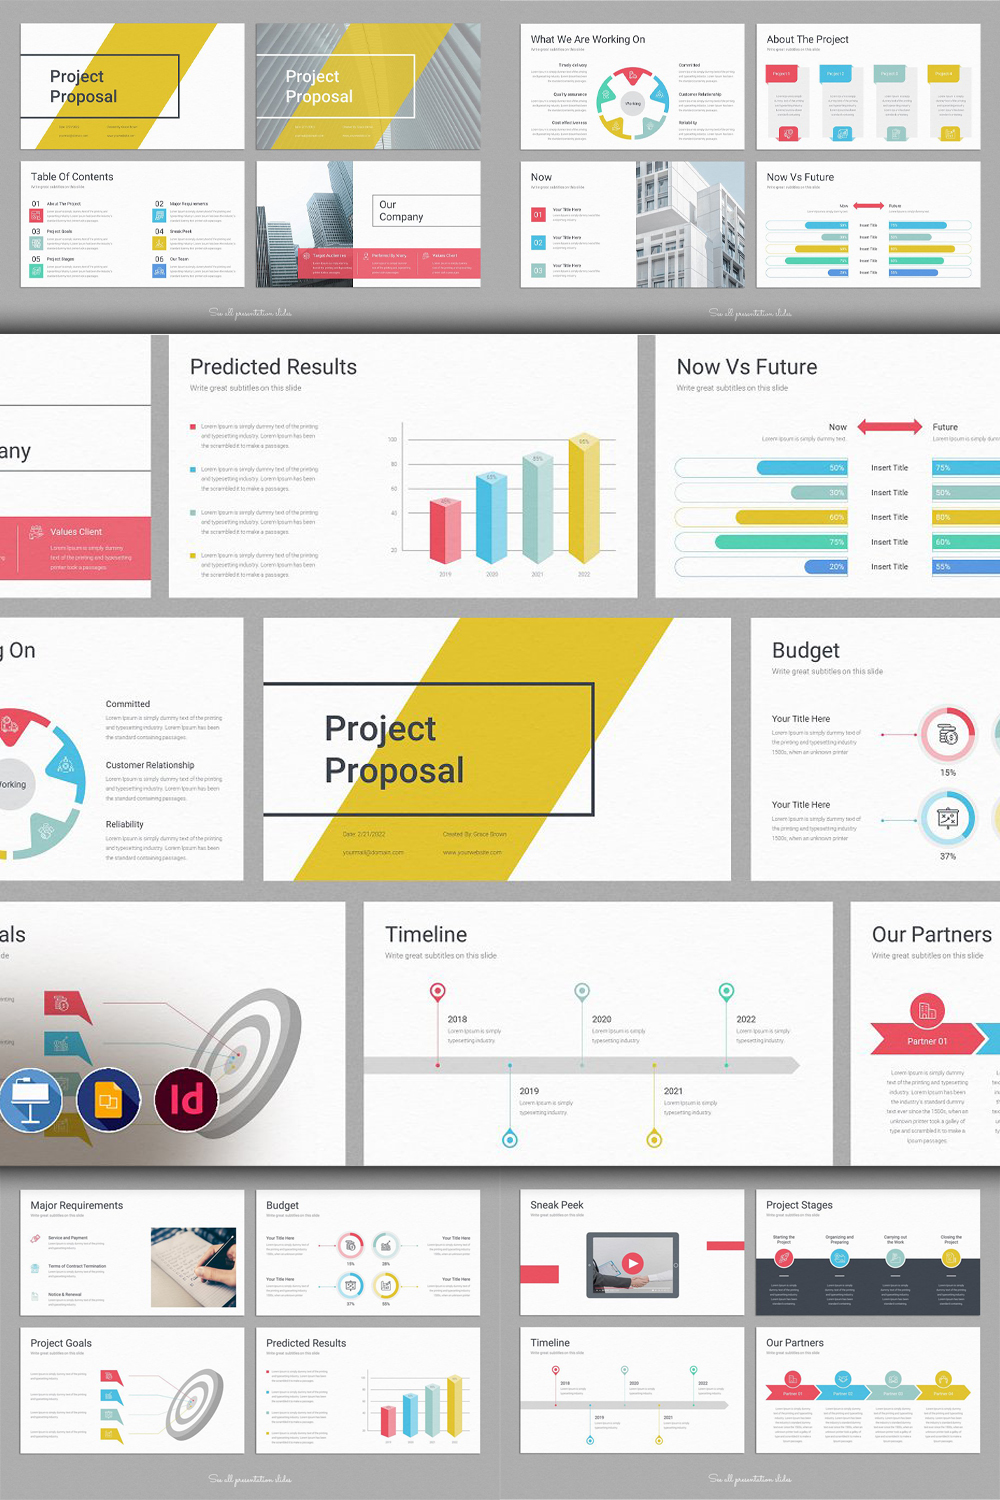 Project proposal template of pinterest.